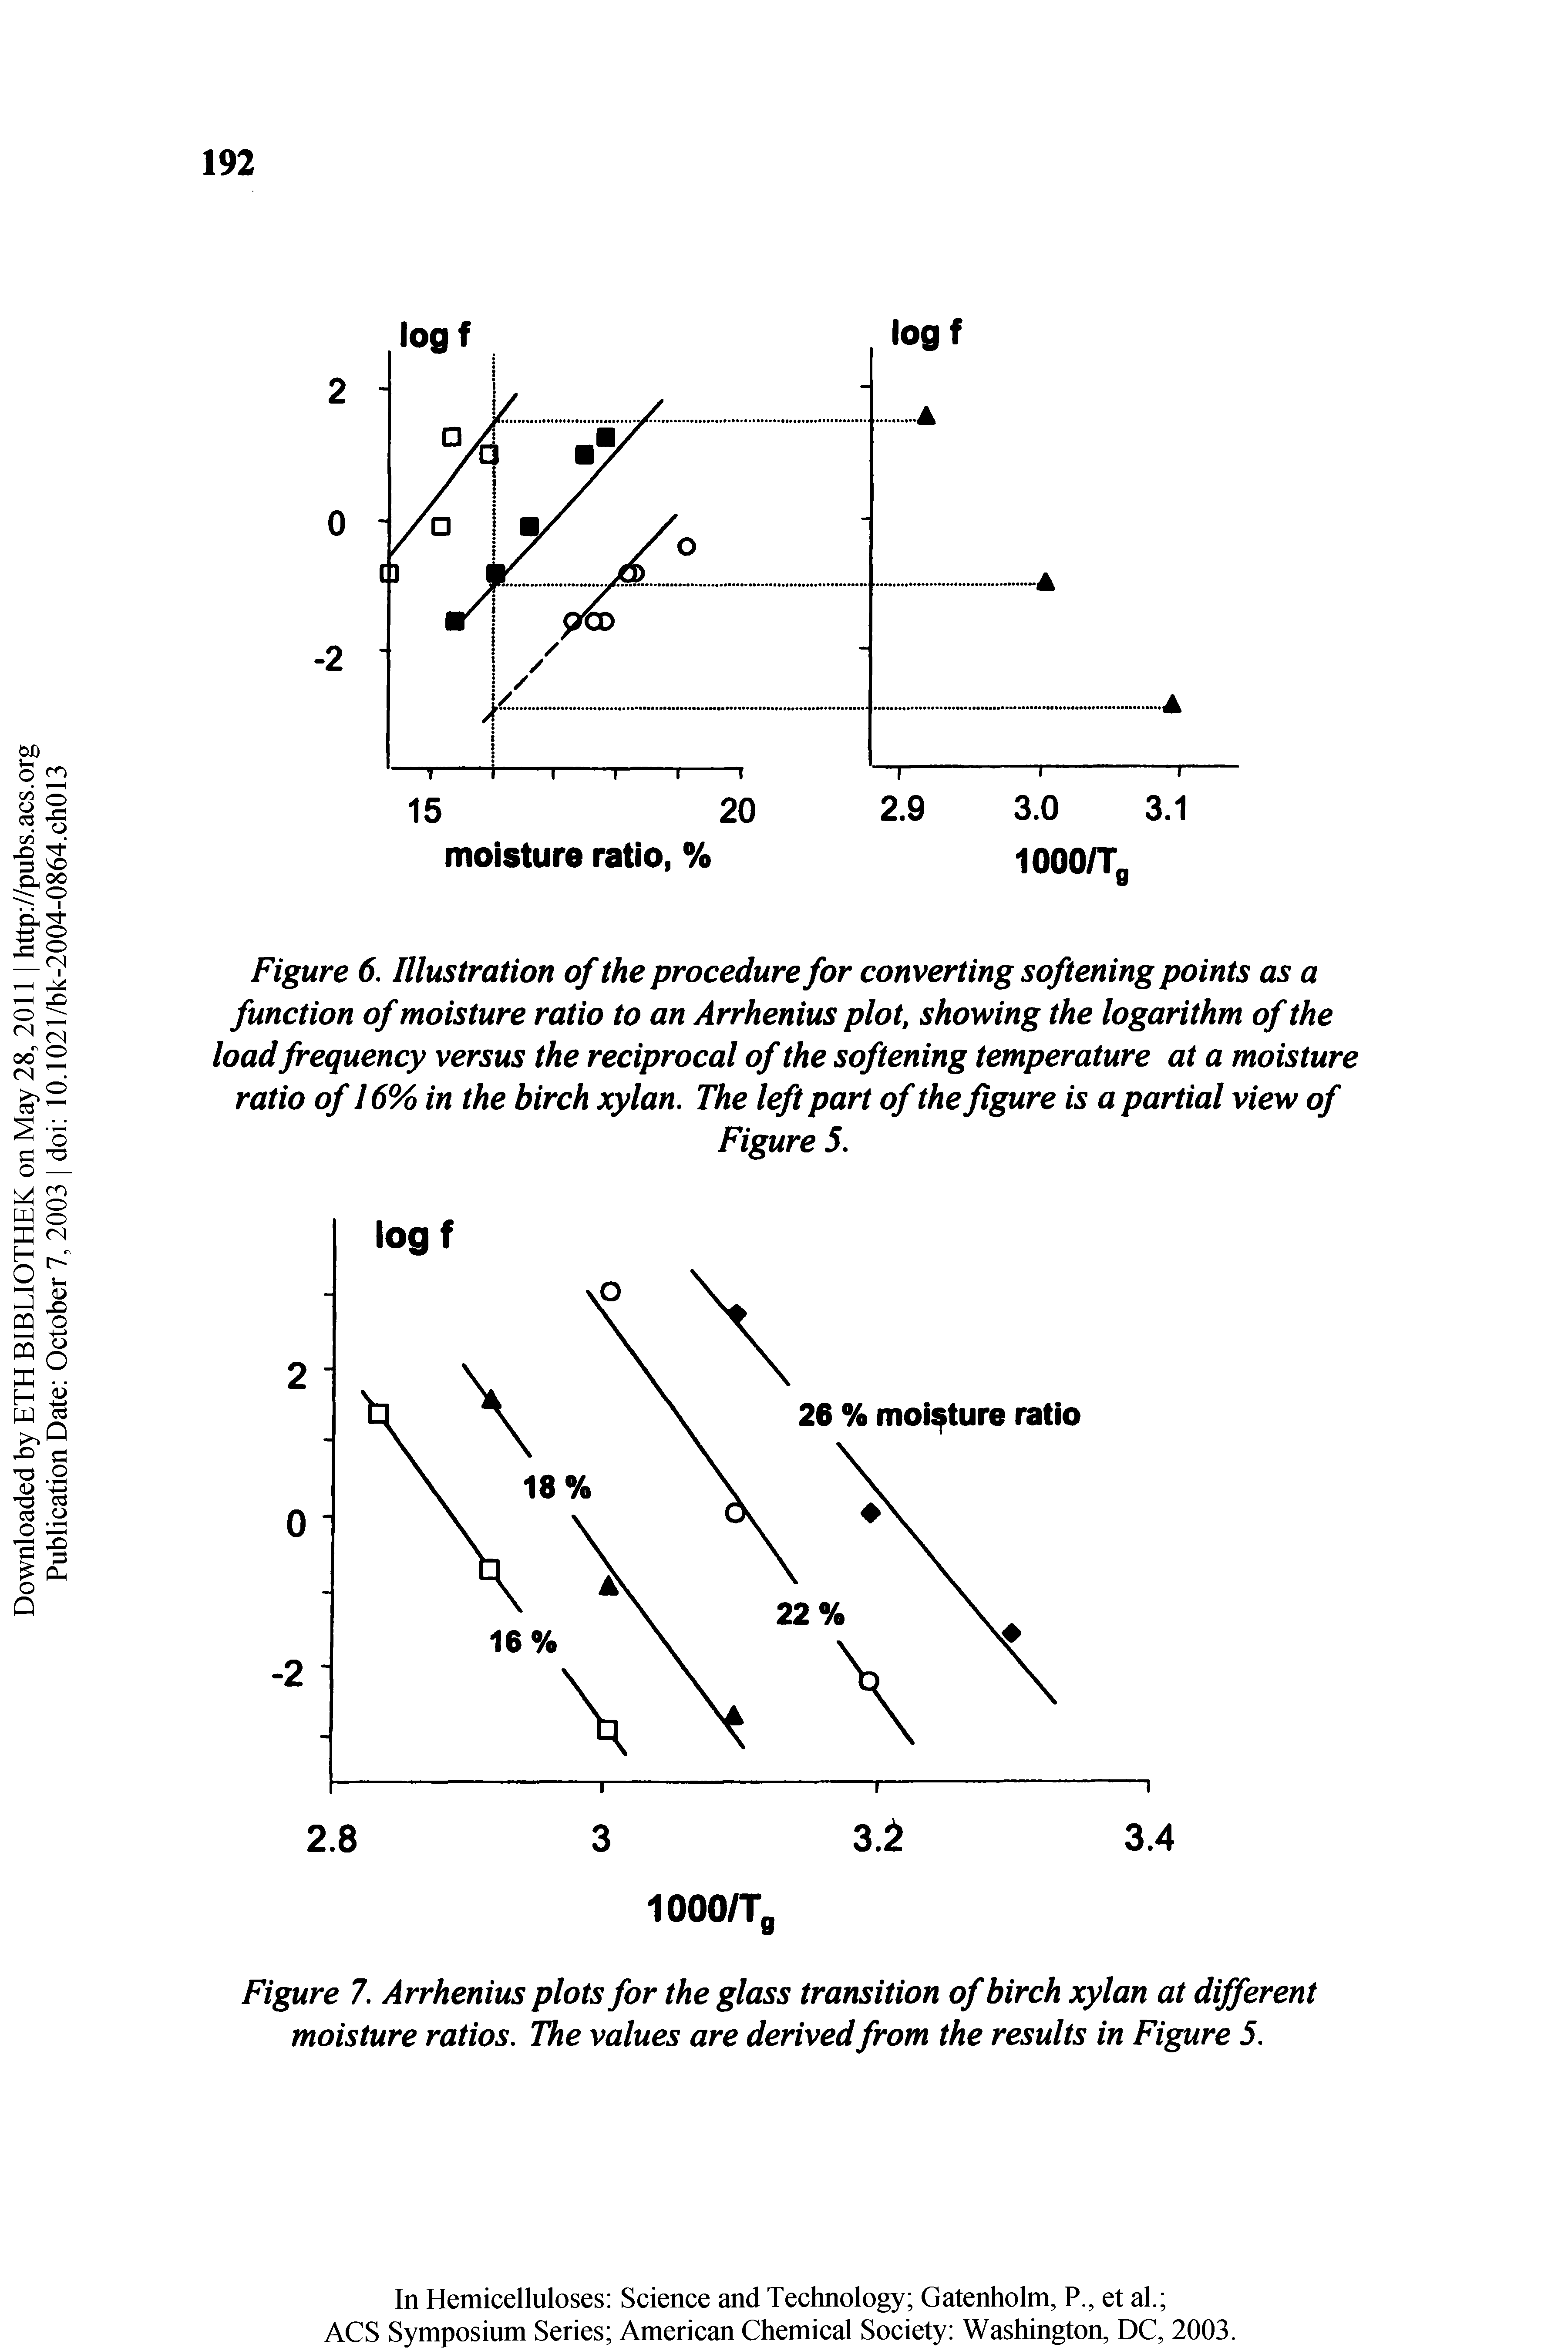 Figure 6. Illustration of the procedure for converting softening points as a function of moisture ratio to an Arrhenius plot, showing the logarithm of the load frequency versus the reciprocal of the softening temperature at a moisture ratio of 16% in the birch xylan. The left part of the figure is a partial view of...